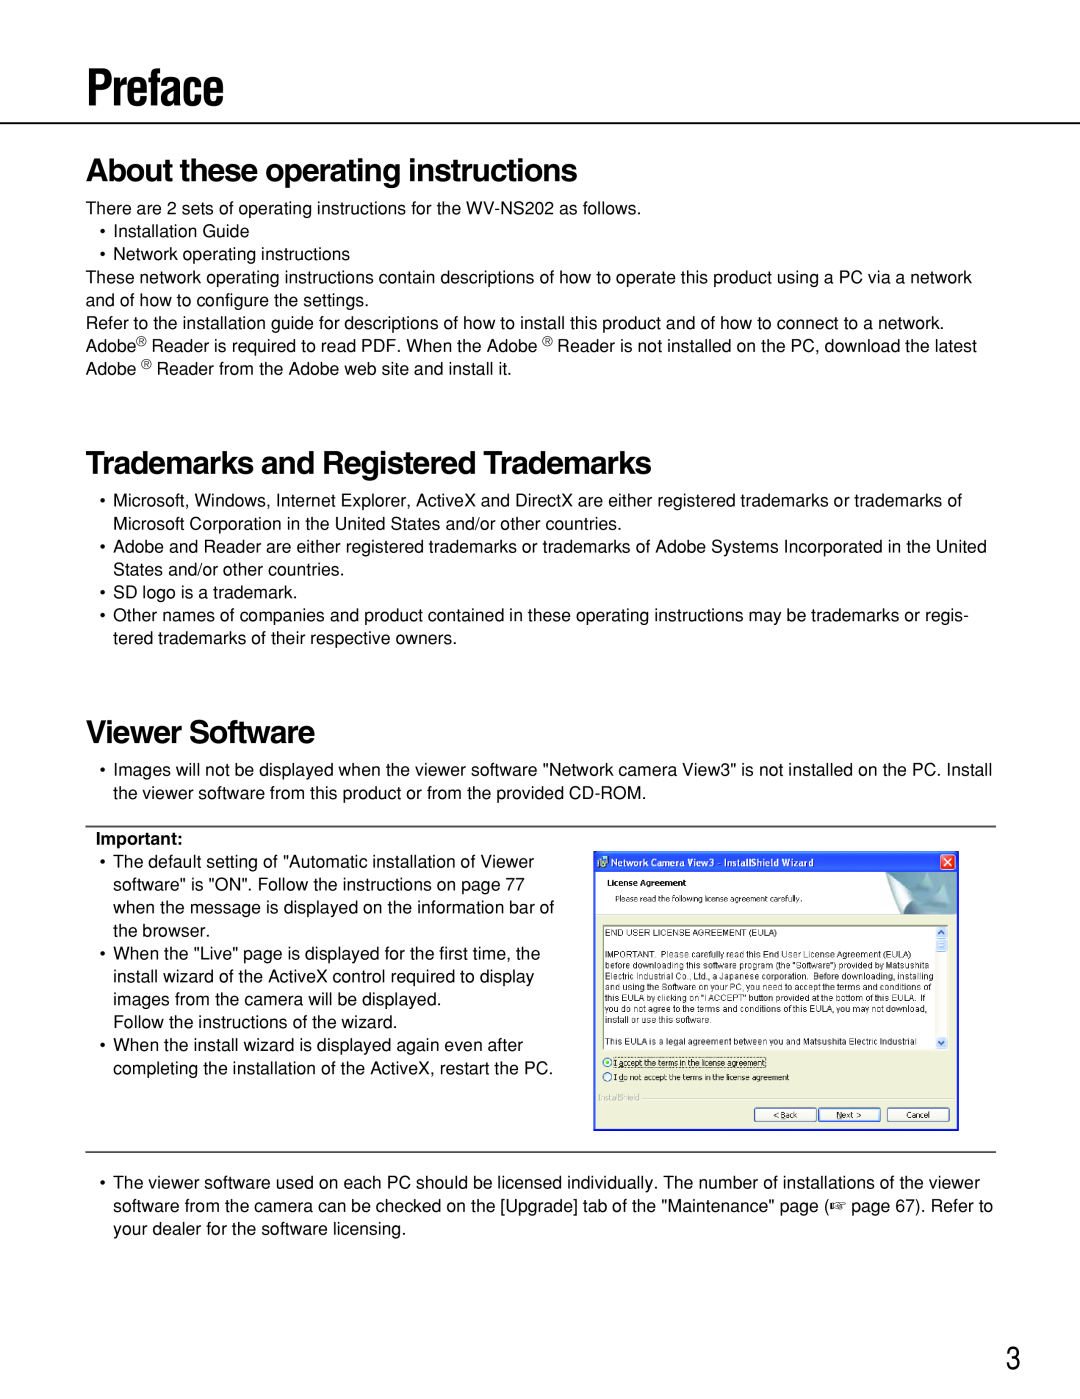 Panasonic WV-NS202 Preface, About these operating instructions, Trademarks and Registered Trademarks, Viewer Software 